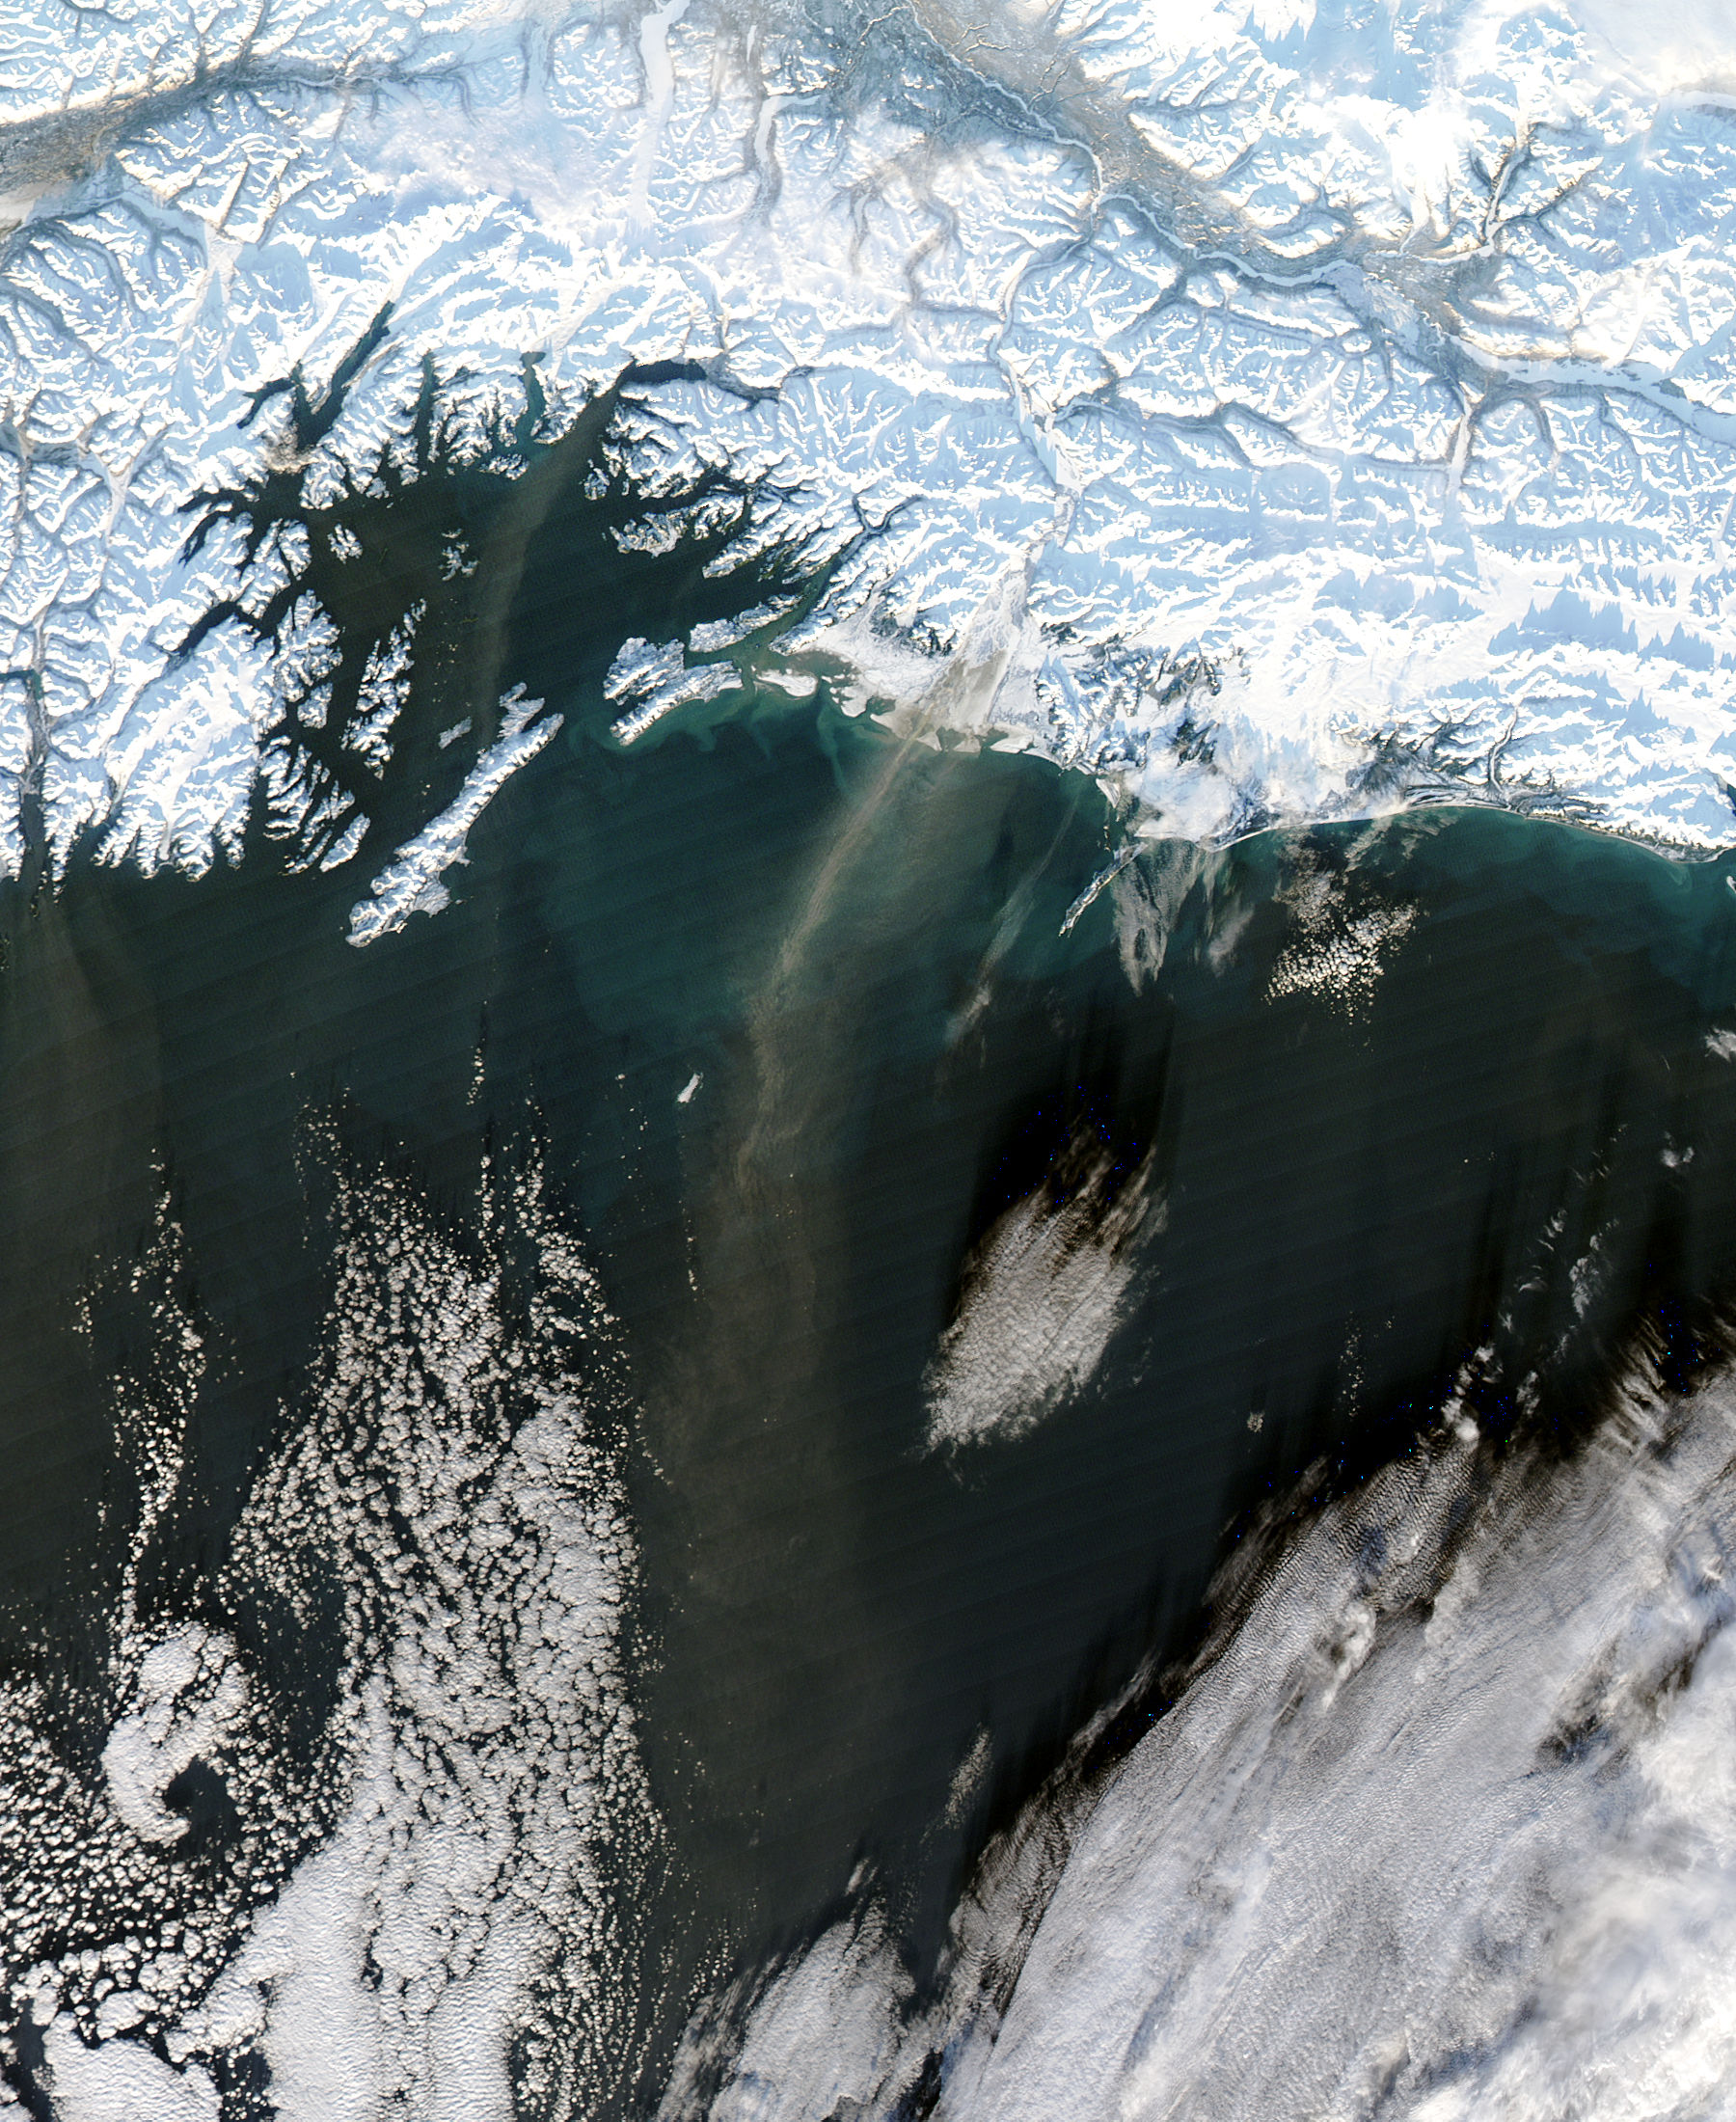 Dust over the Gulf of Alaska - related image preview